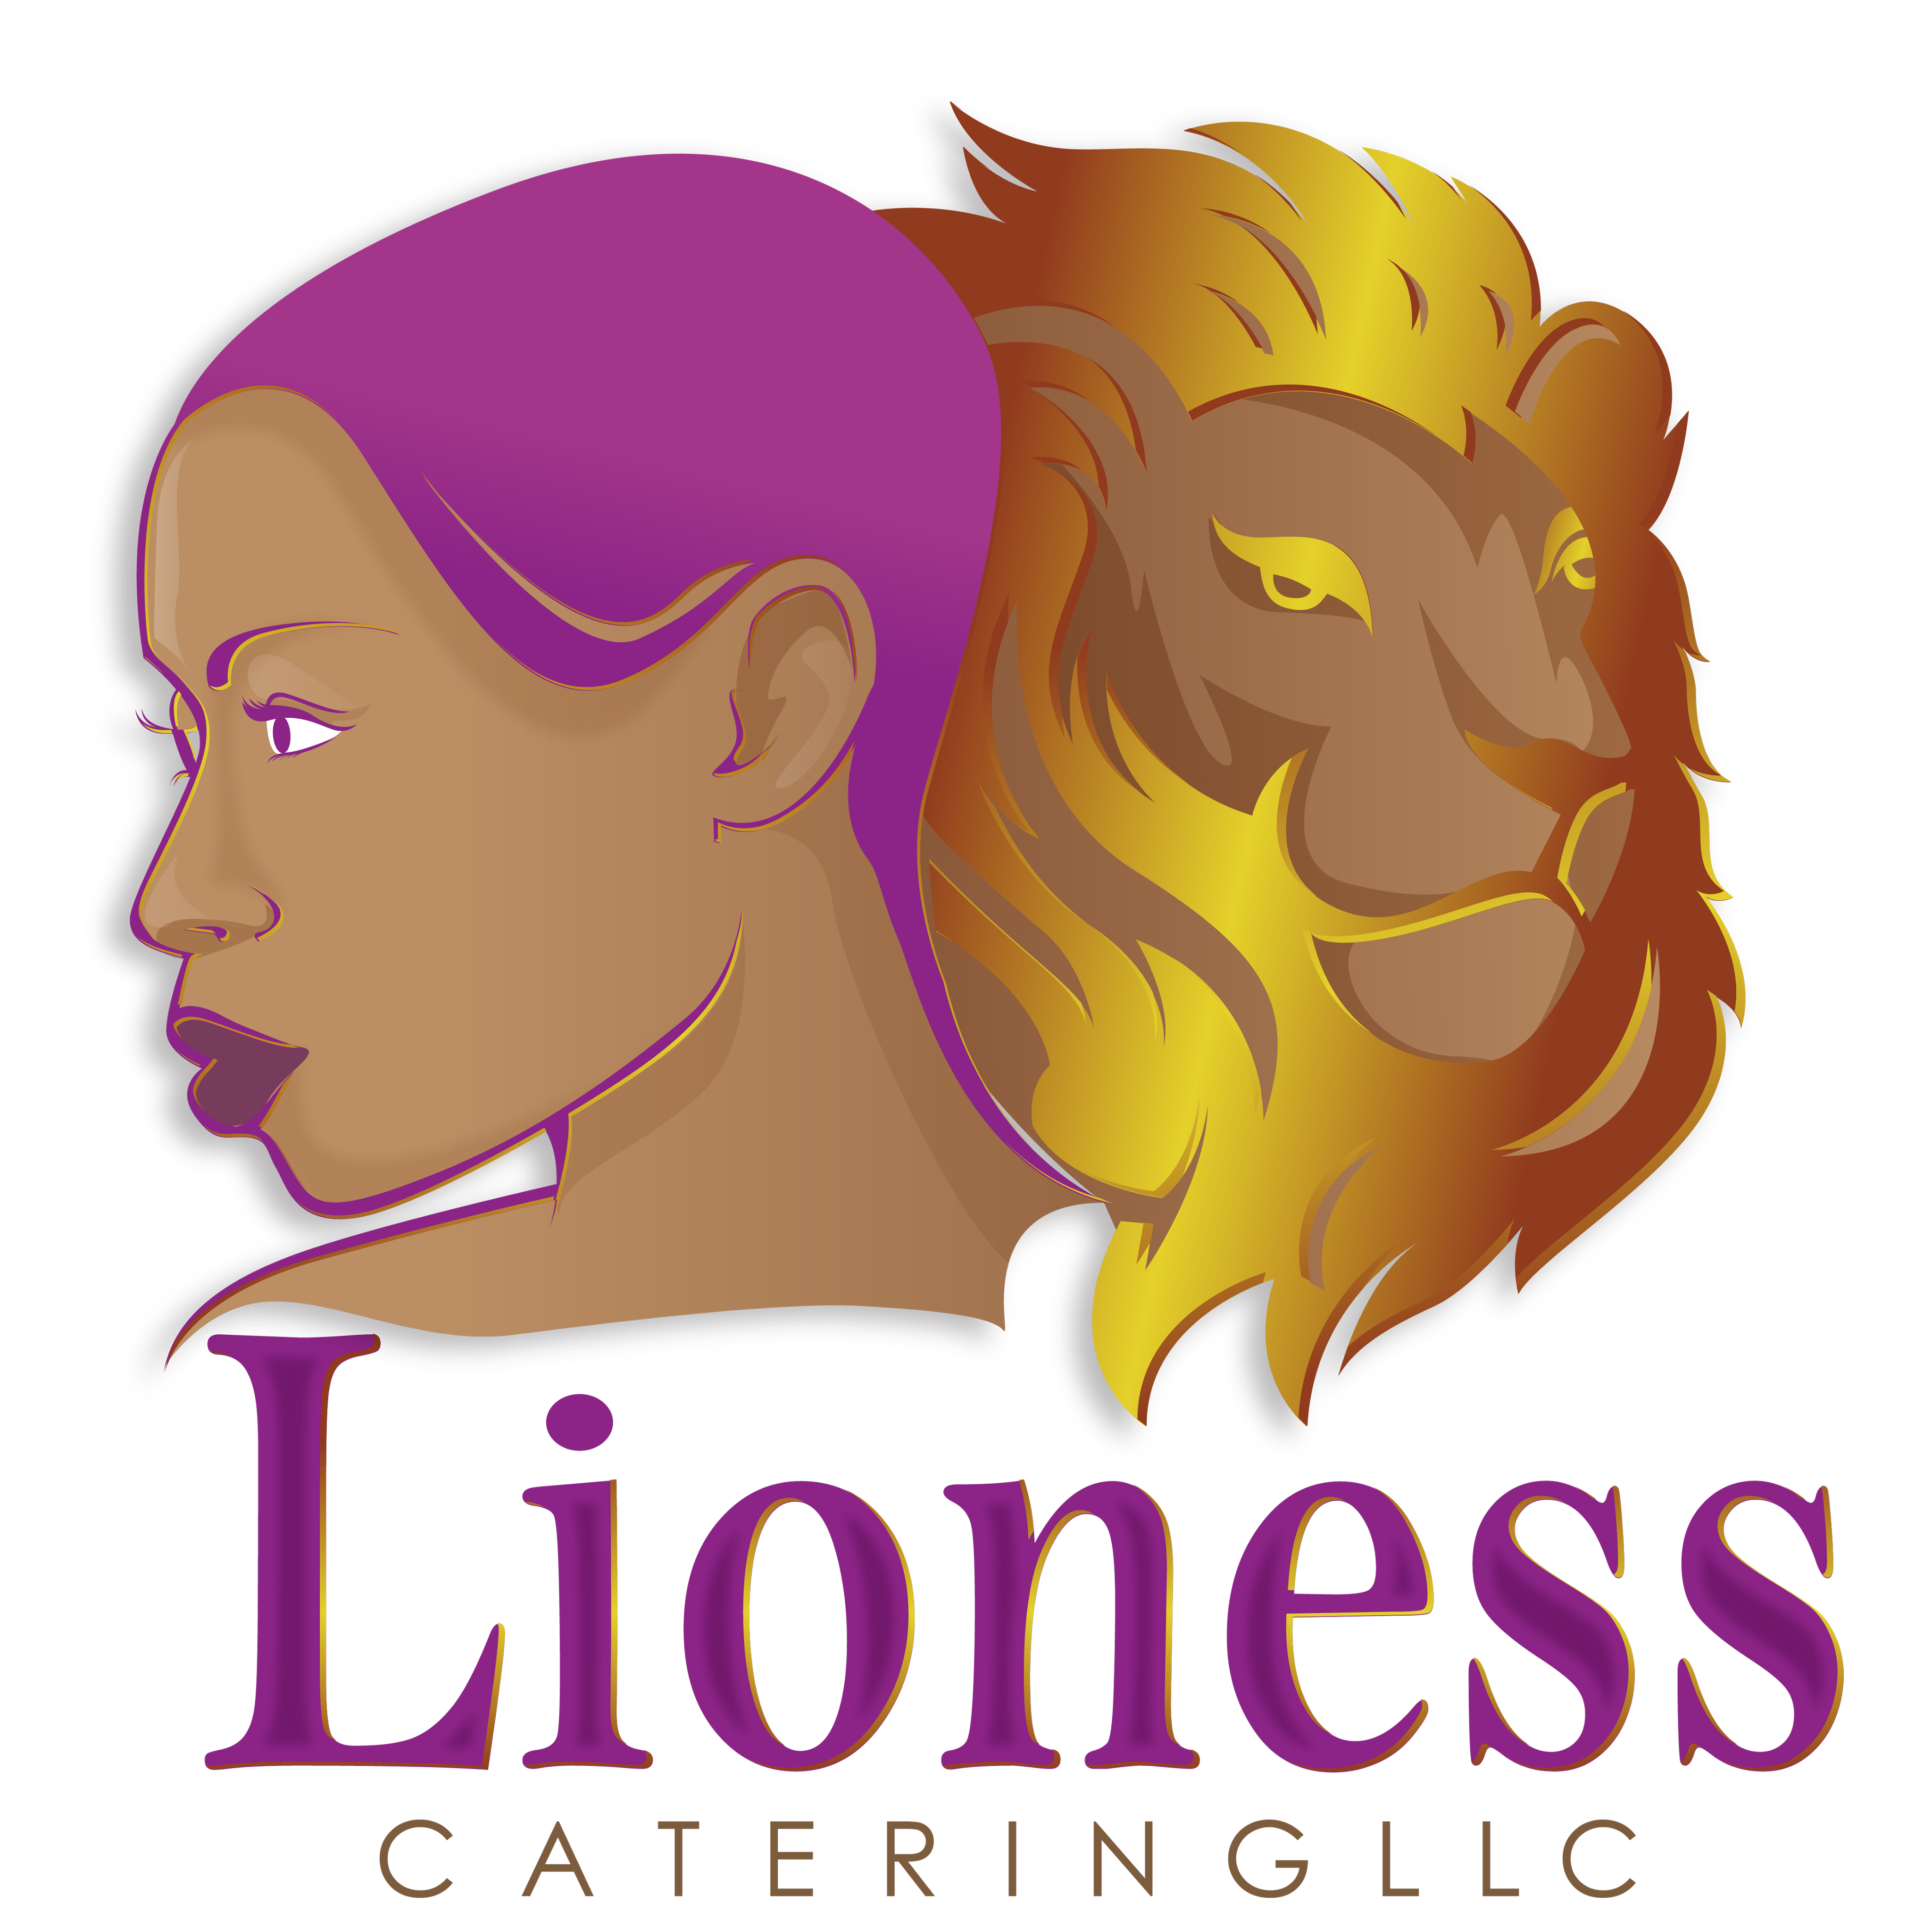 Lioness Catering